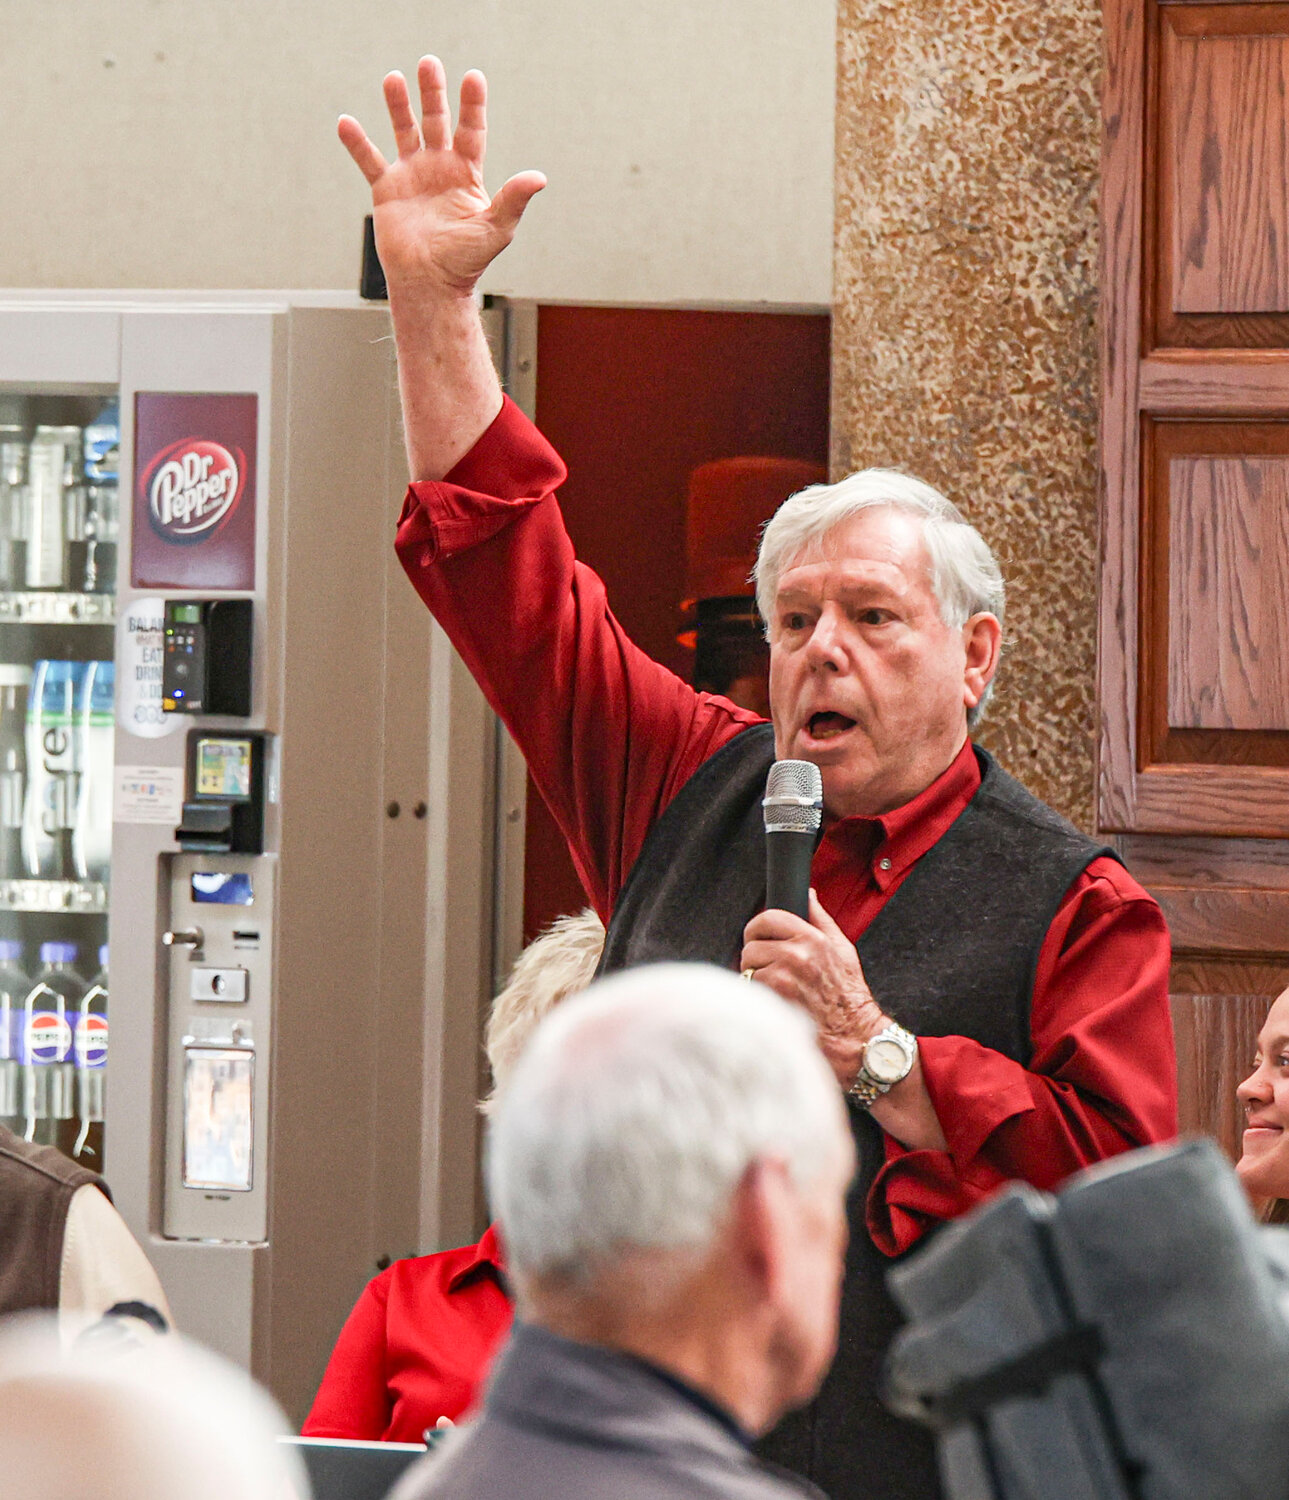 Dr. David Hammer raises his arm and cheers while asking if there are any other Marines in the crowd at the Missouri Veterans’ Home on Friday, Nov. 10.